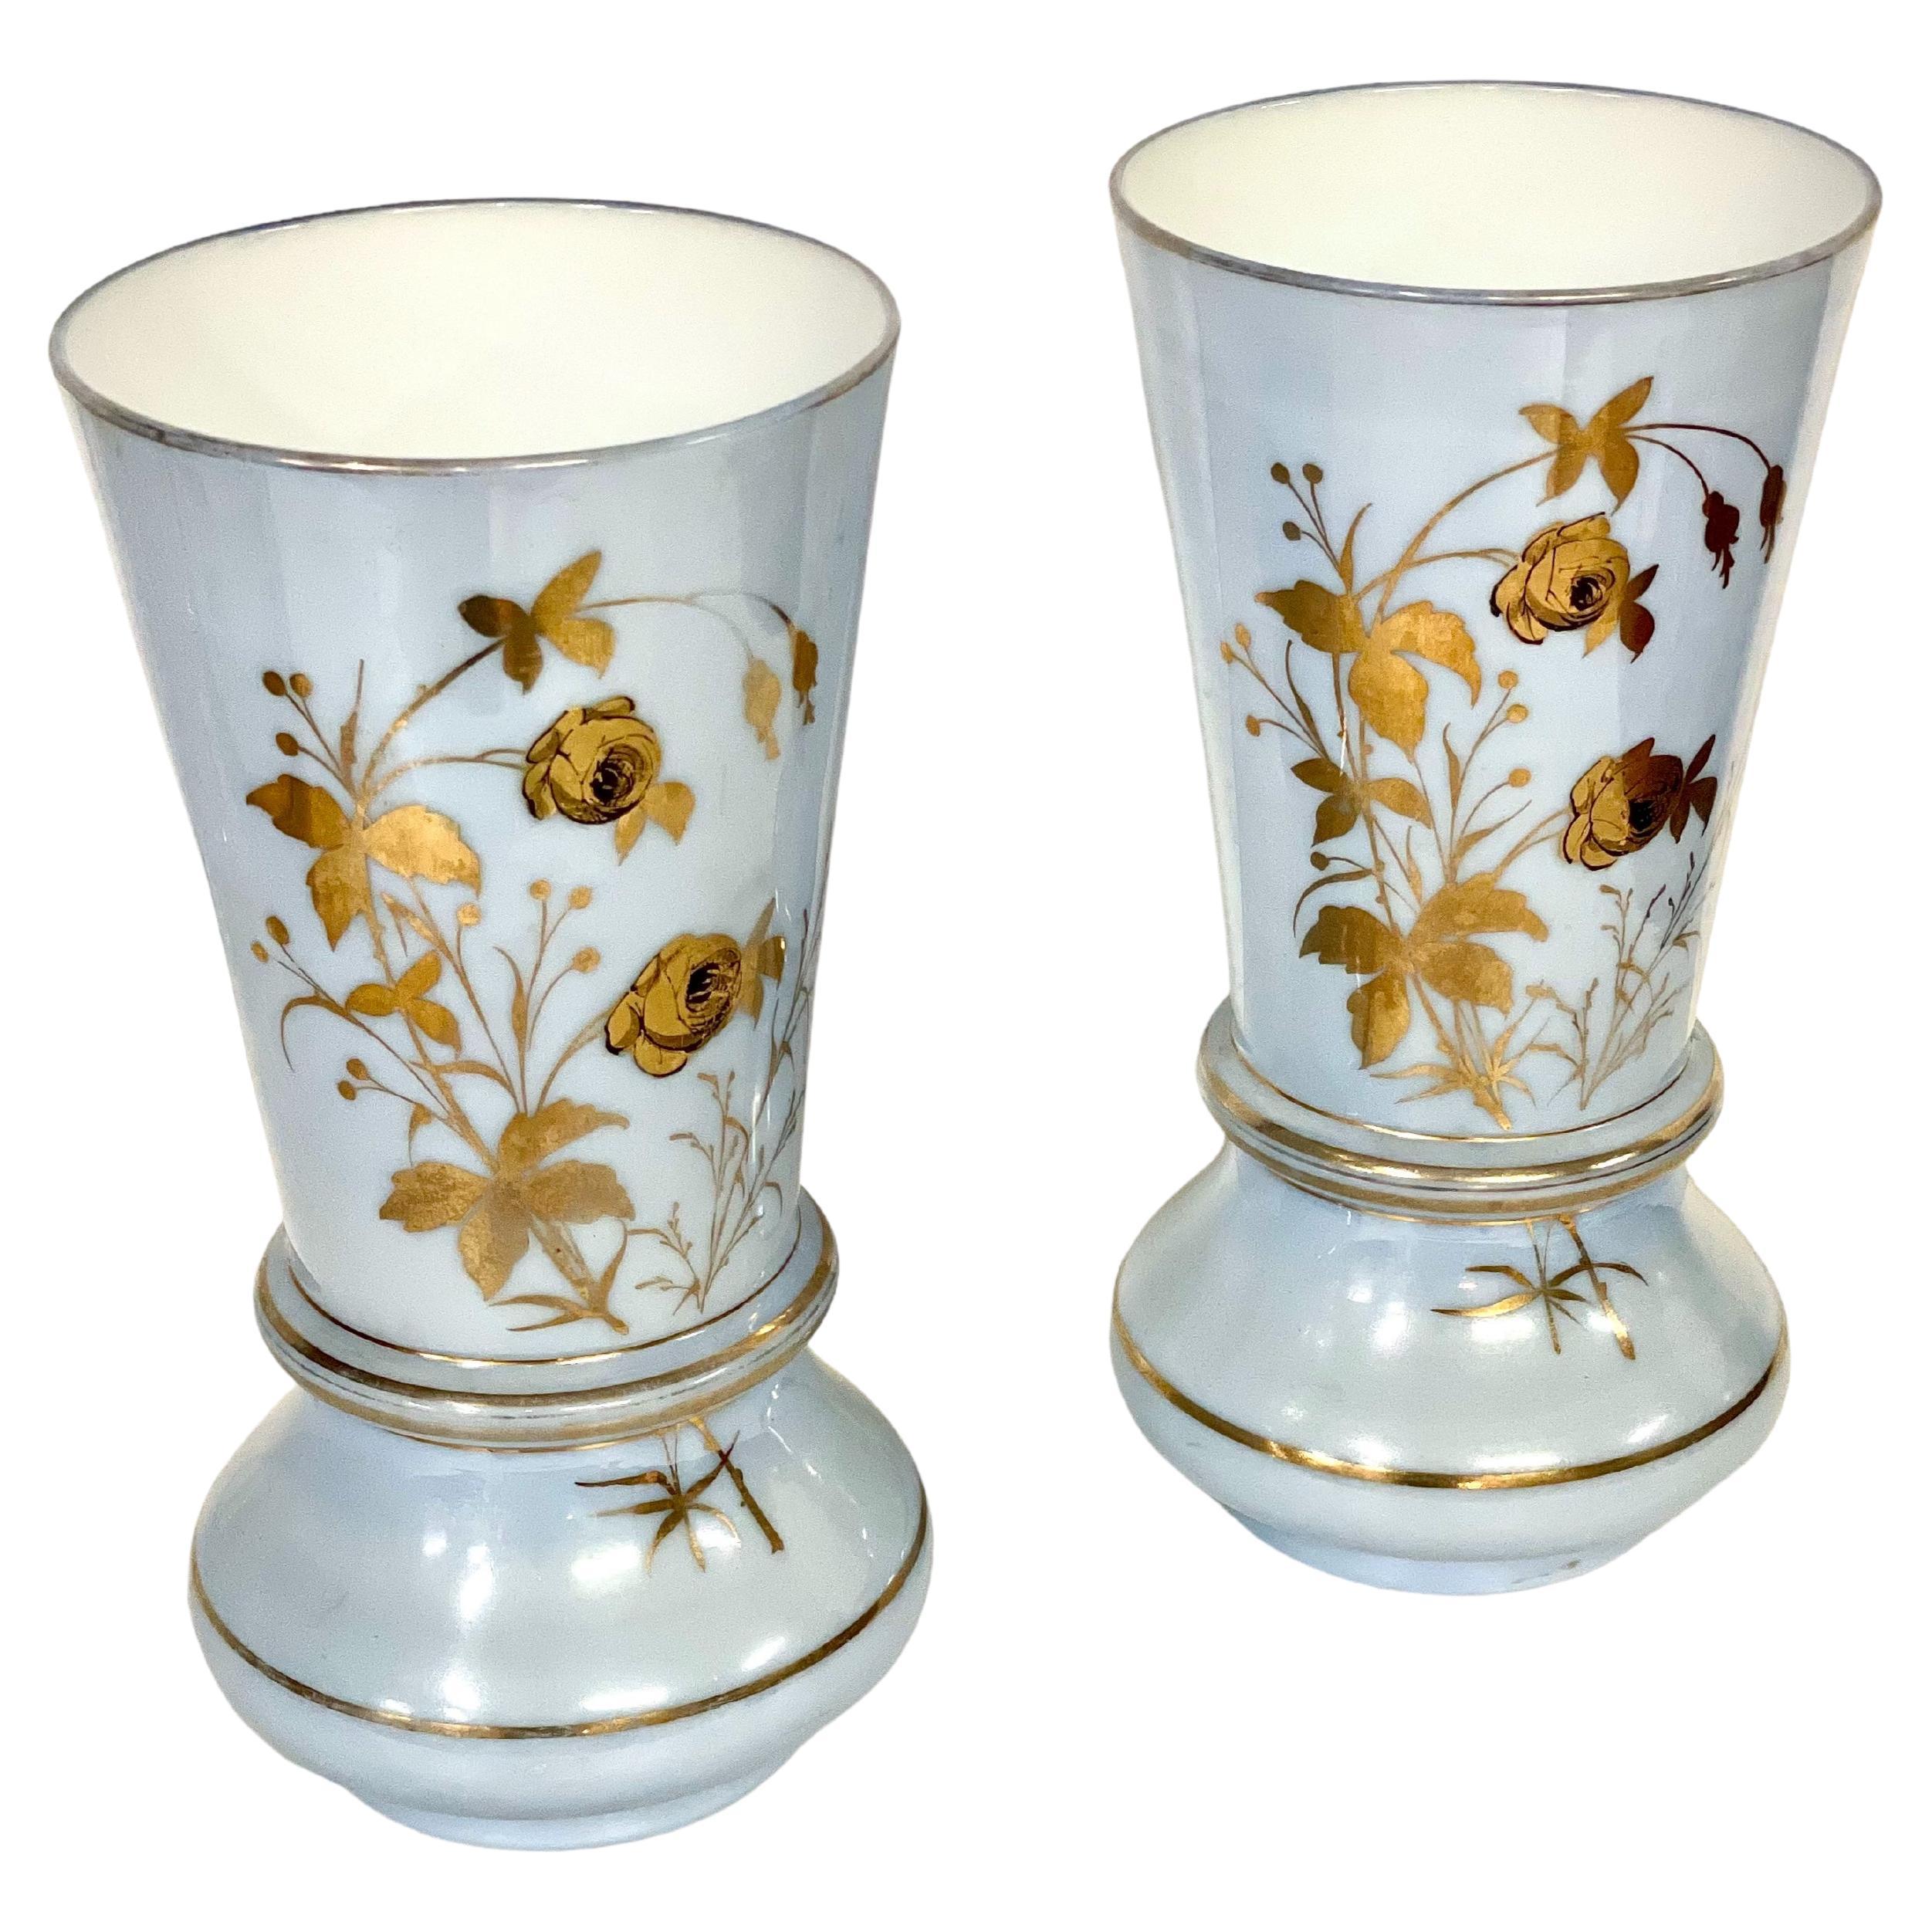 Pair of Large Gilt and Pale Blue Opaline Vases, Napoleon III Period